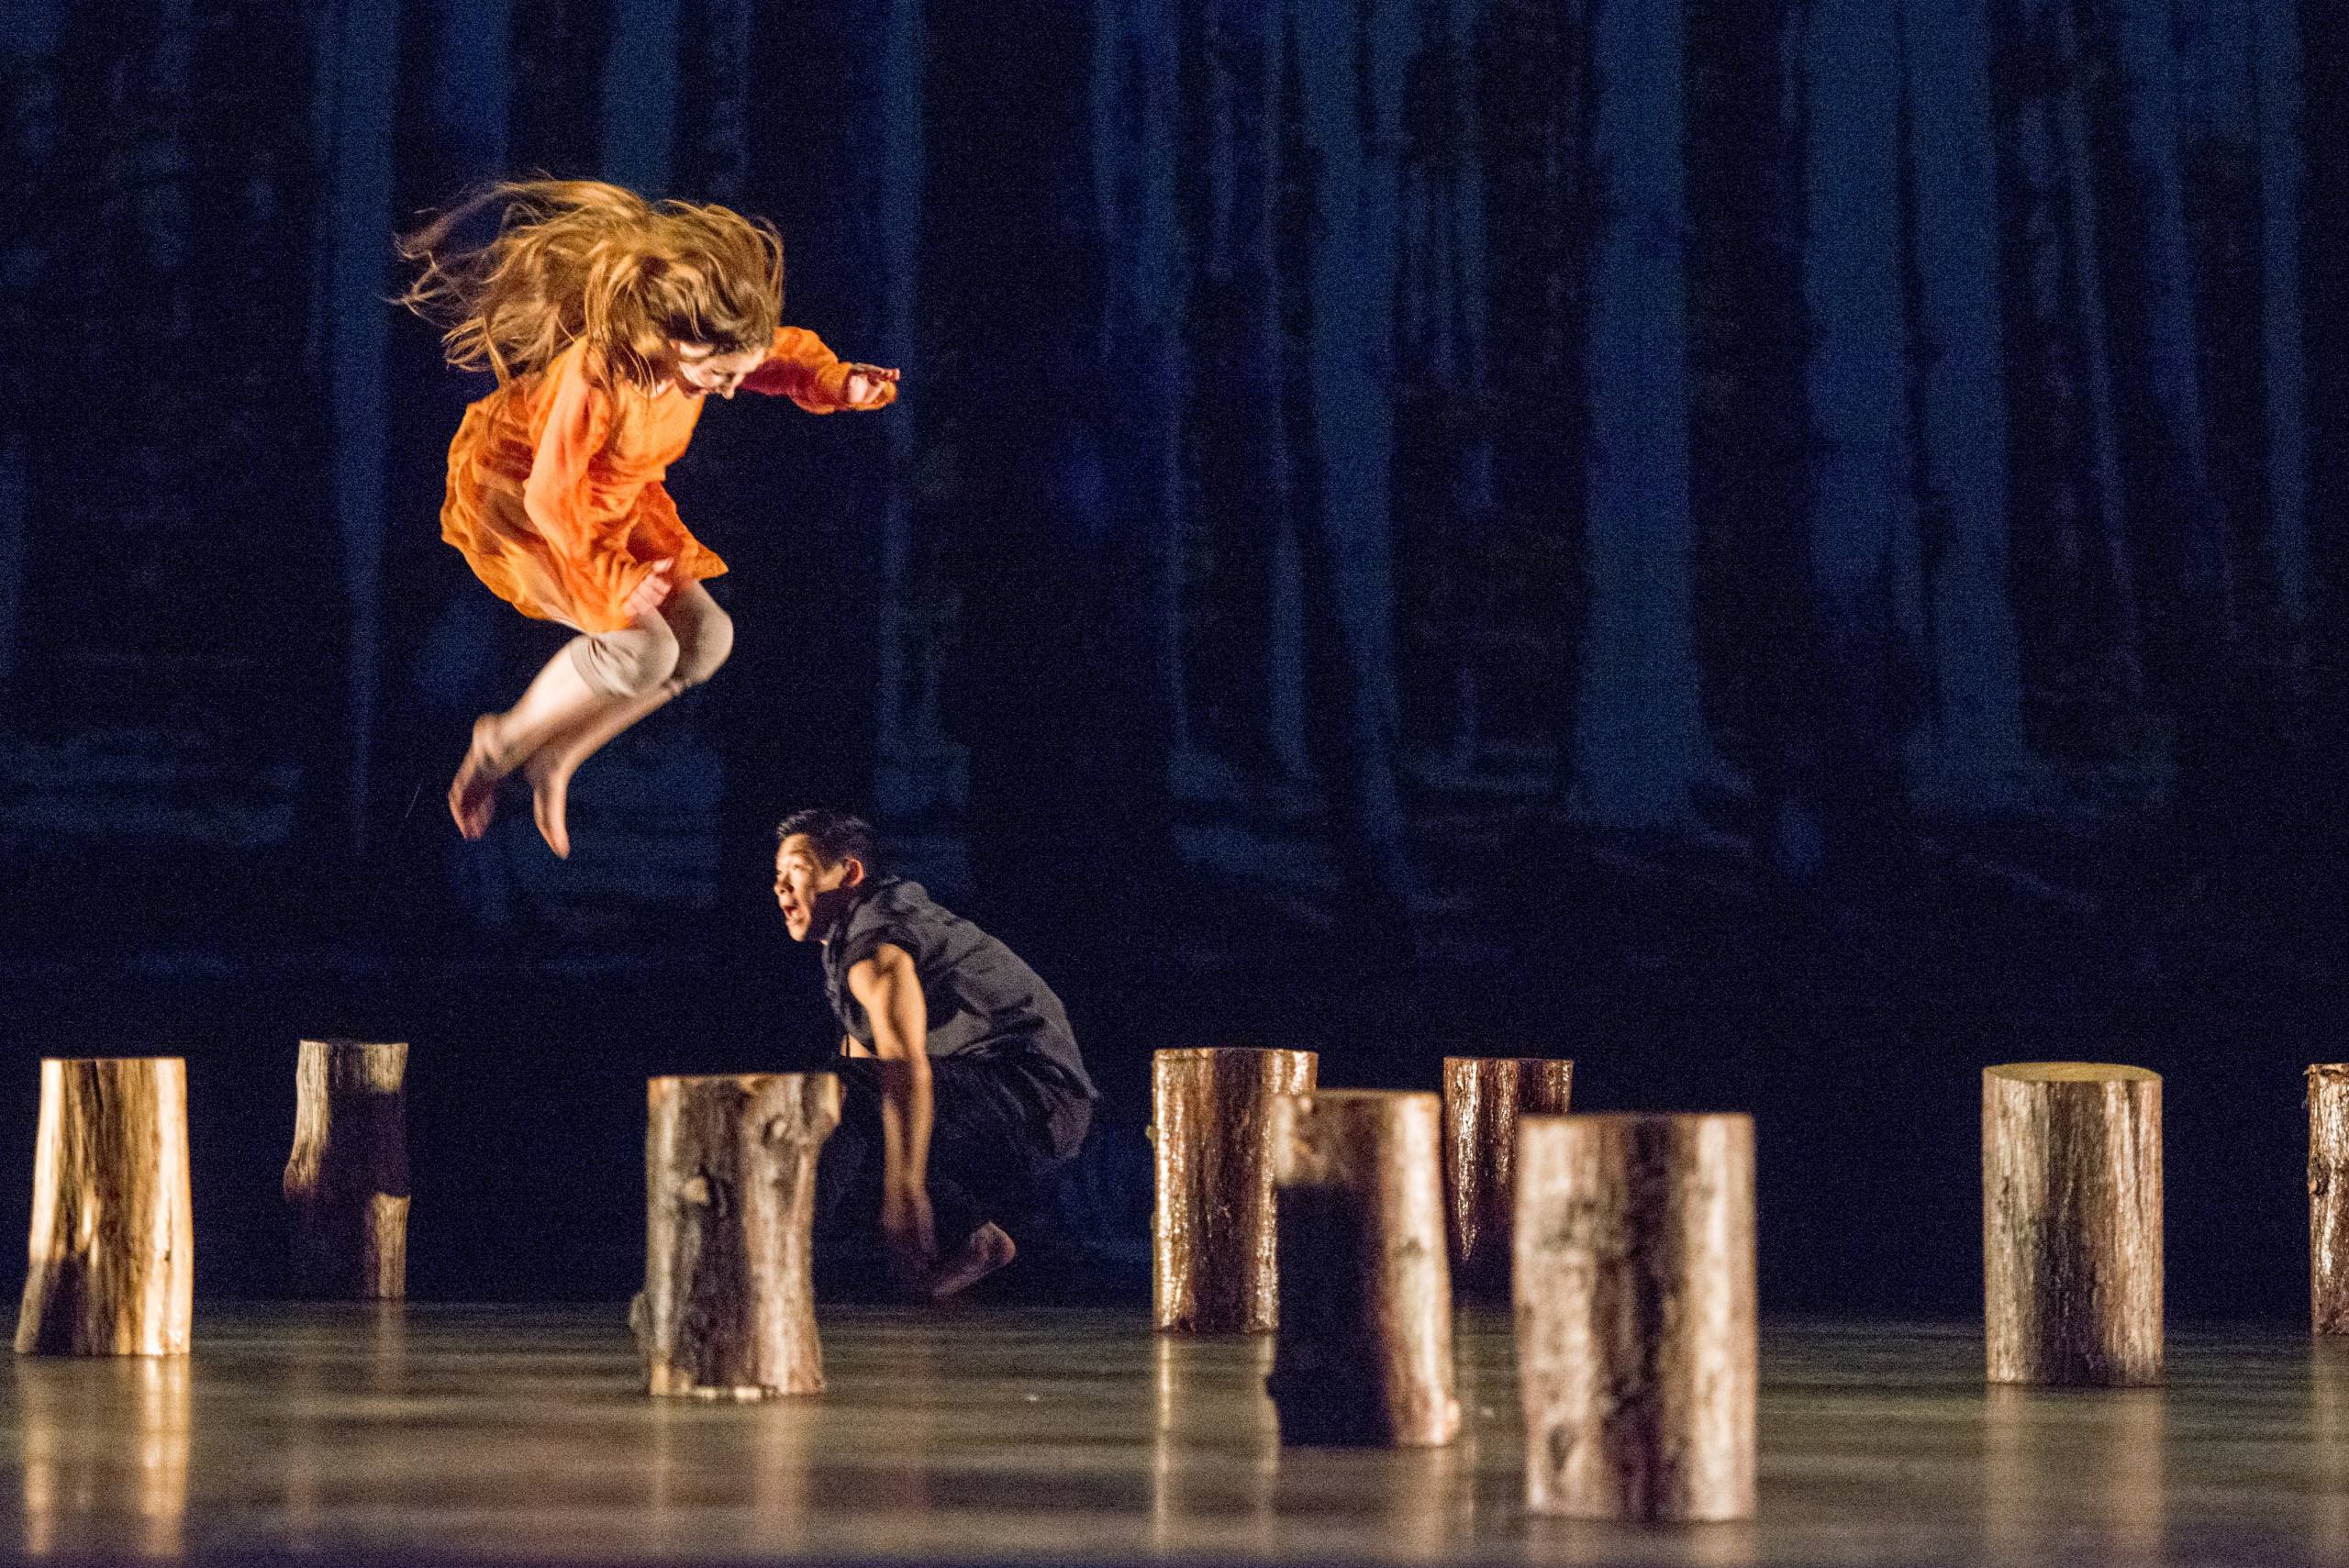 Grace Wales Bonner in NYDC dance collab